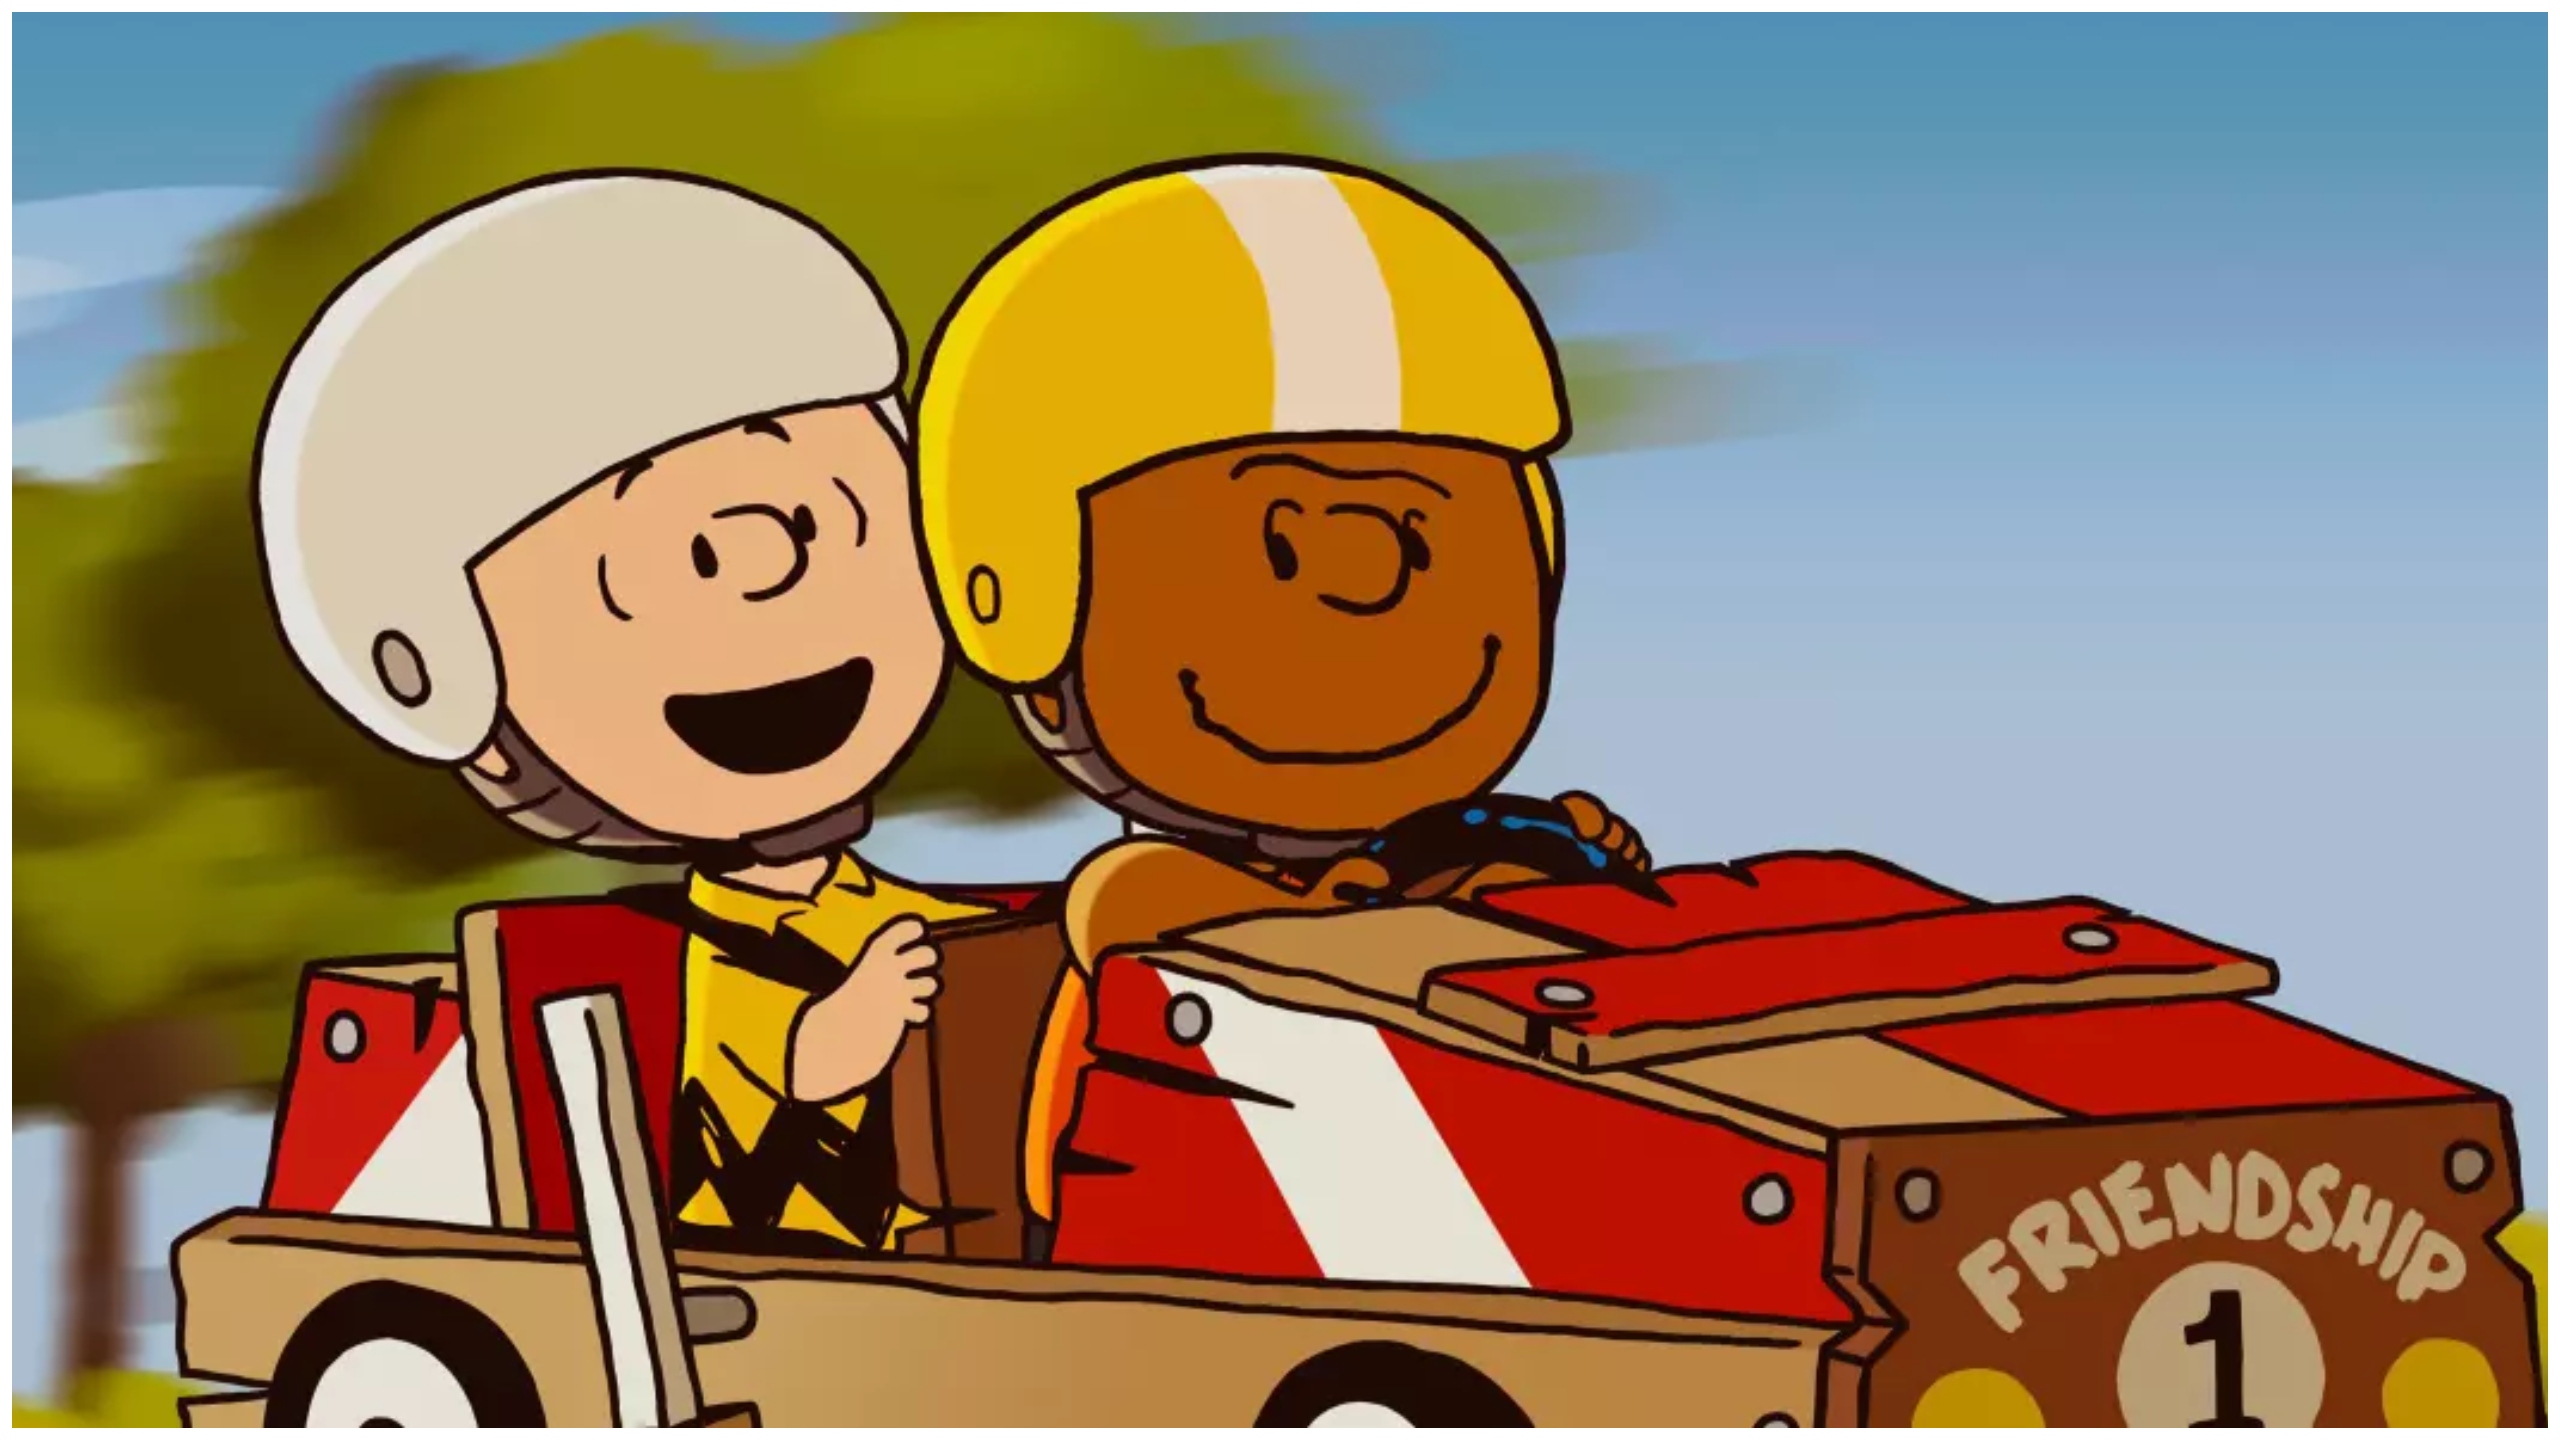 Amazing History Made As Franklin The First Black ‘Peanuts’ Character Gets His Proper Introduction After 56 Years